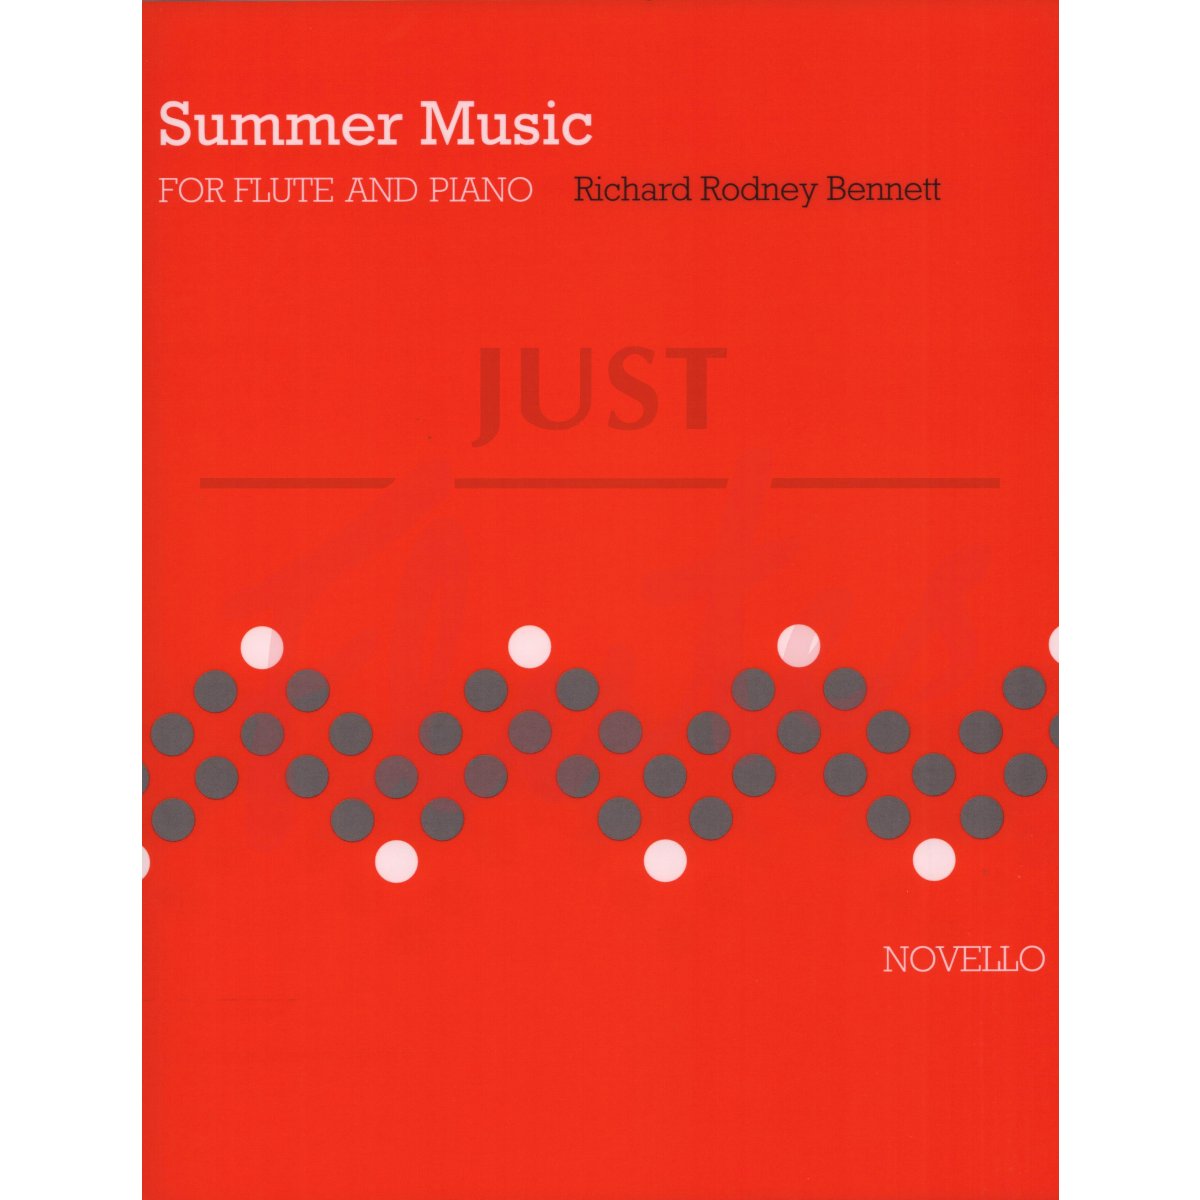 Summer Music for Flute and Piano